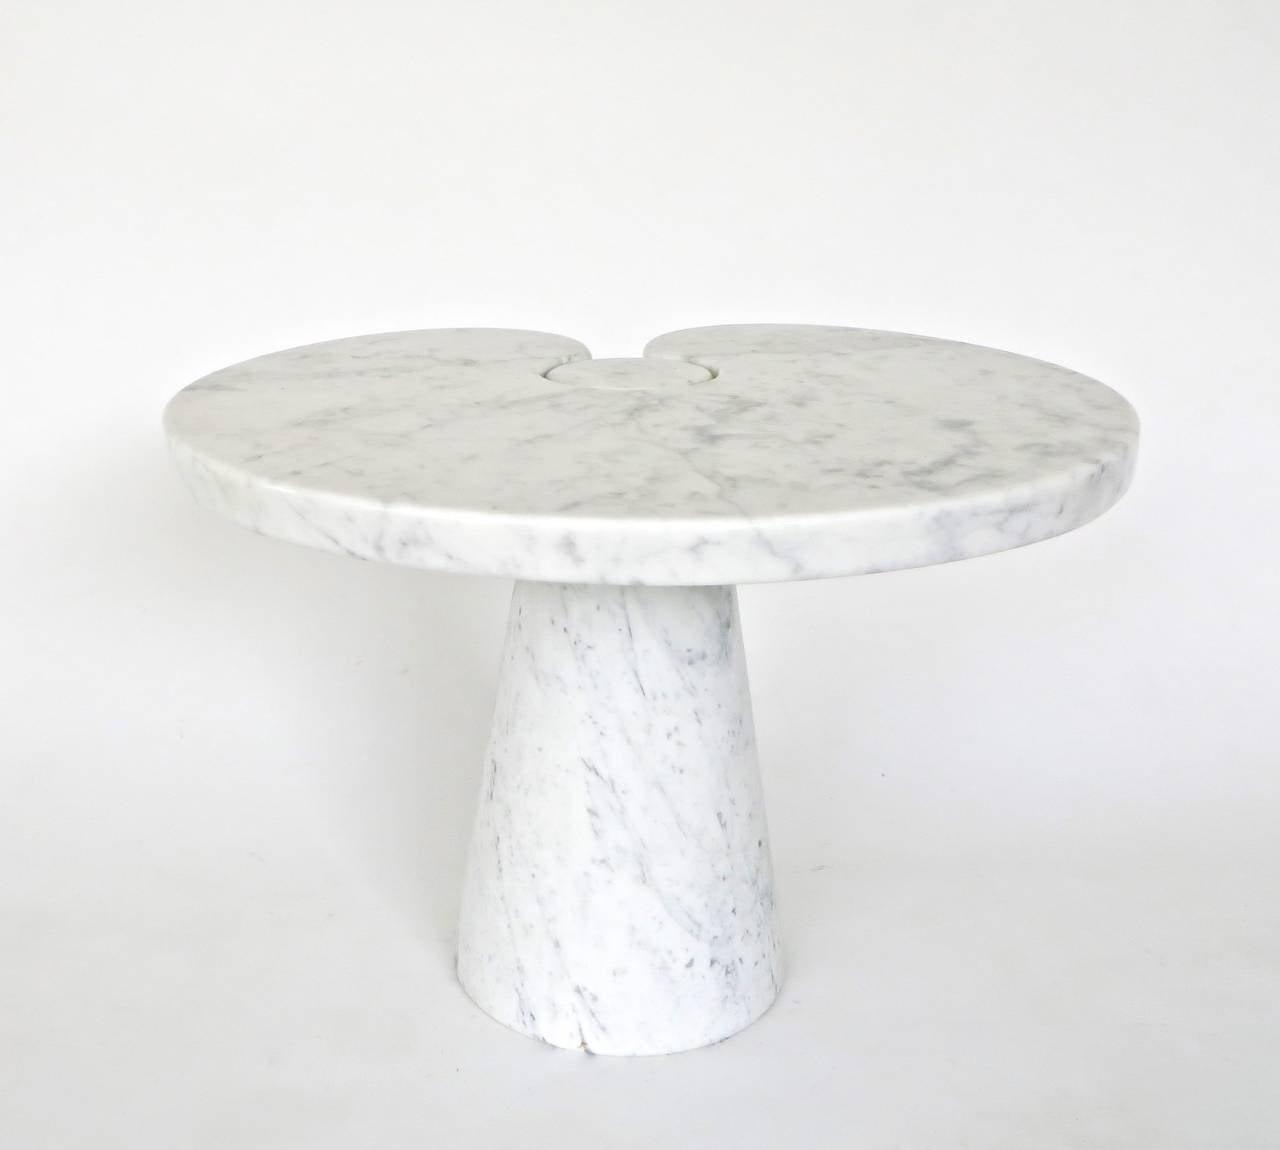 Angelo Mangiarotti Italian white Carrara marble low side table Eros series for Skipper. Excellent condition. Skipper, circa 1971. Mangiarotti was an expert at the highly sculptural use of marble in the entire Eros collection. Each piece was